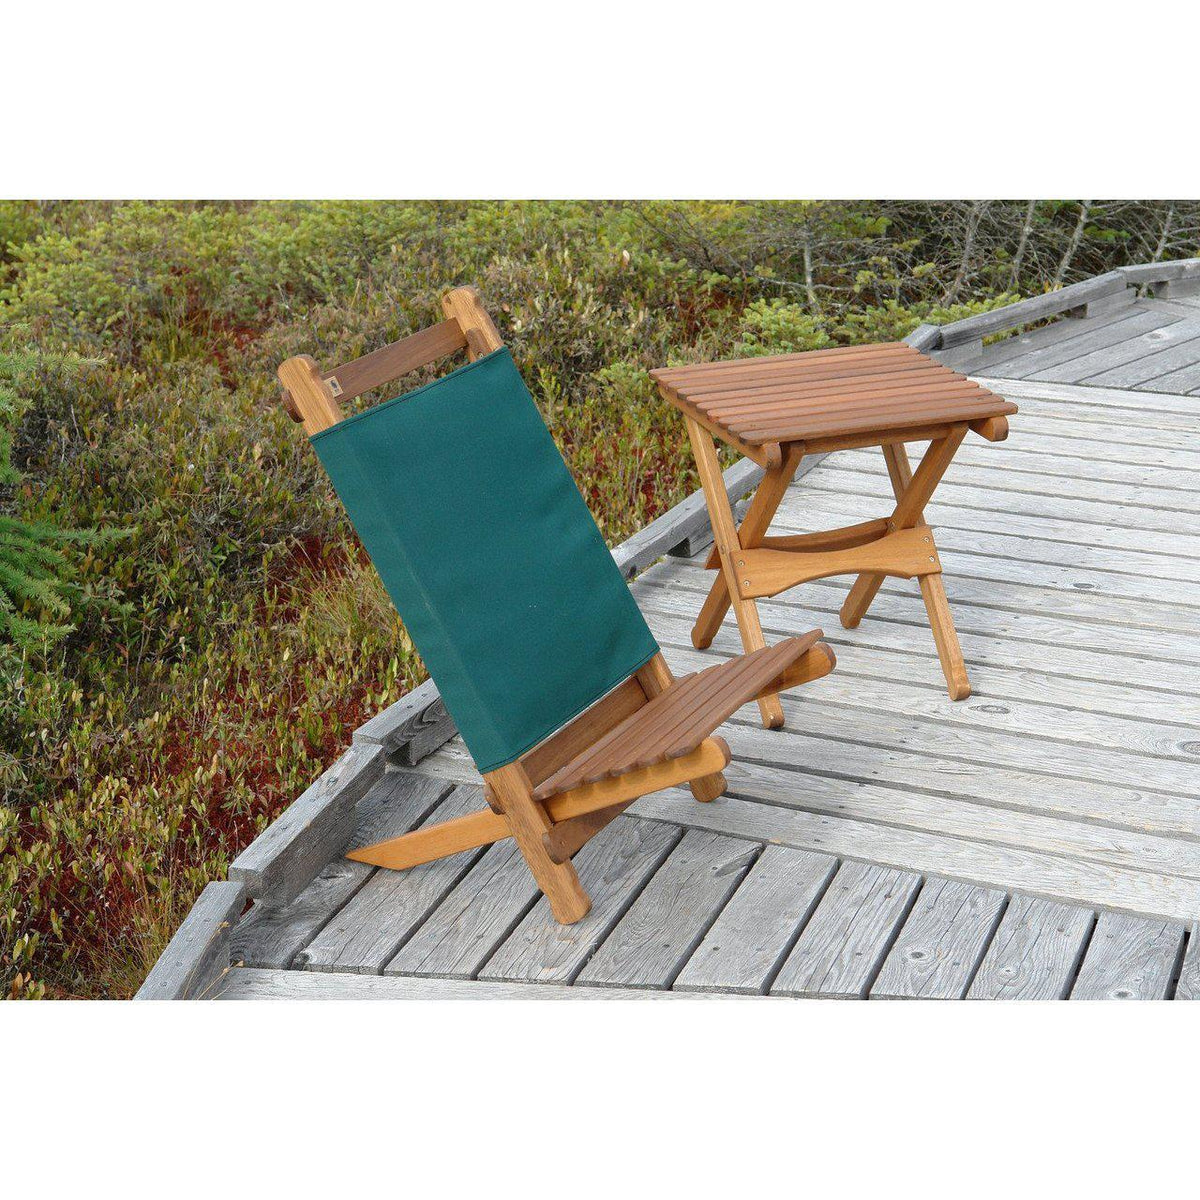 Pangean Lounger pictured wiht the folding table at the Orono Bog Walk